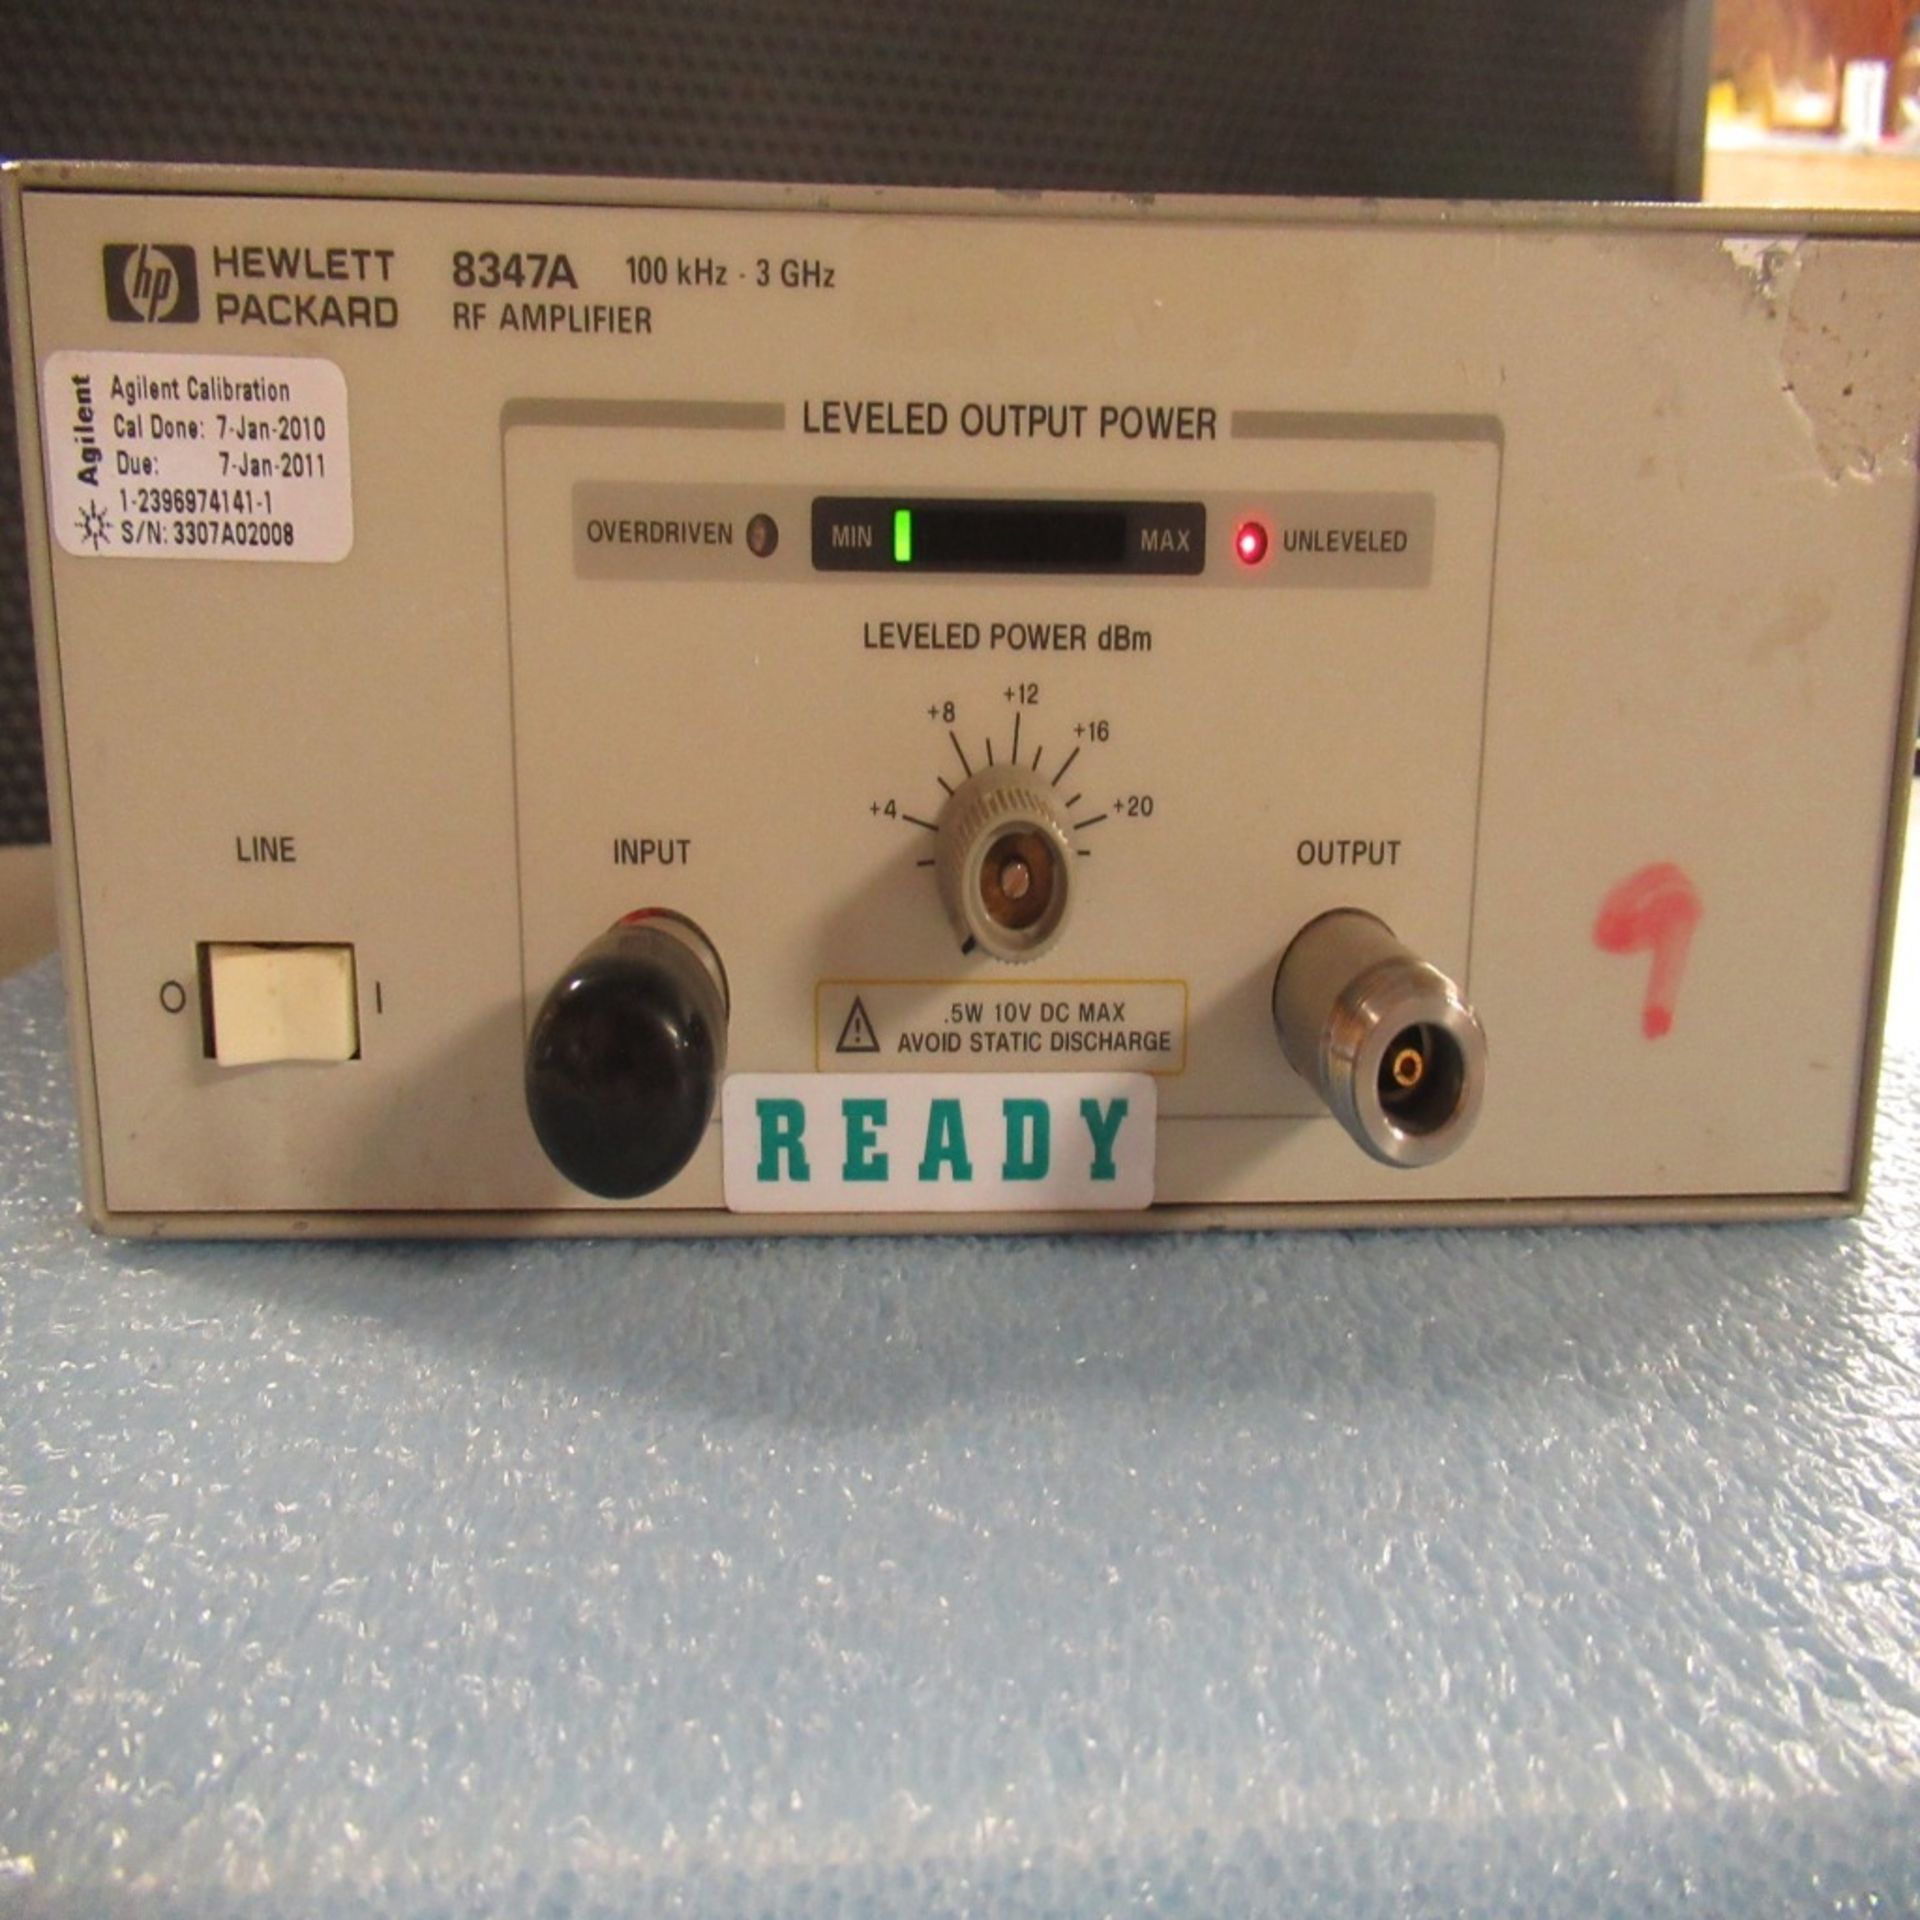 PHOTON SNAP SHOT MODEL 6000 *POWERS ON* NO SCREEN DISPLAY; FARNELL AP20-80 REGULATED POWER SUPPLY * - Image 193 of 222